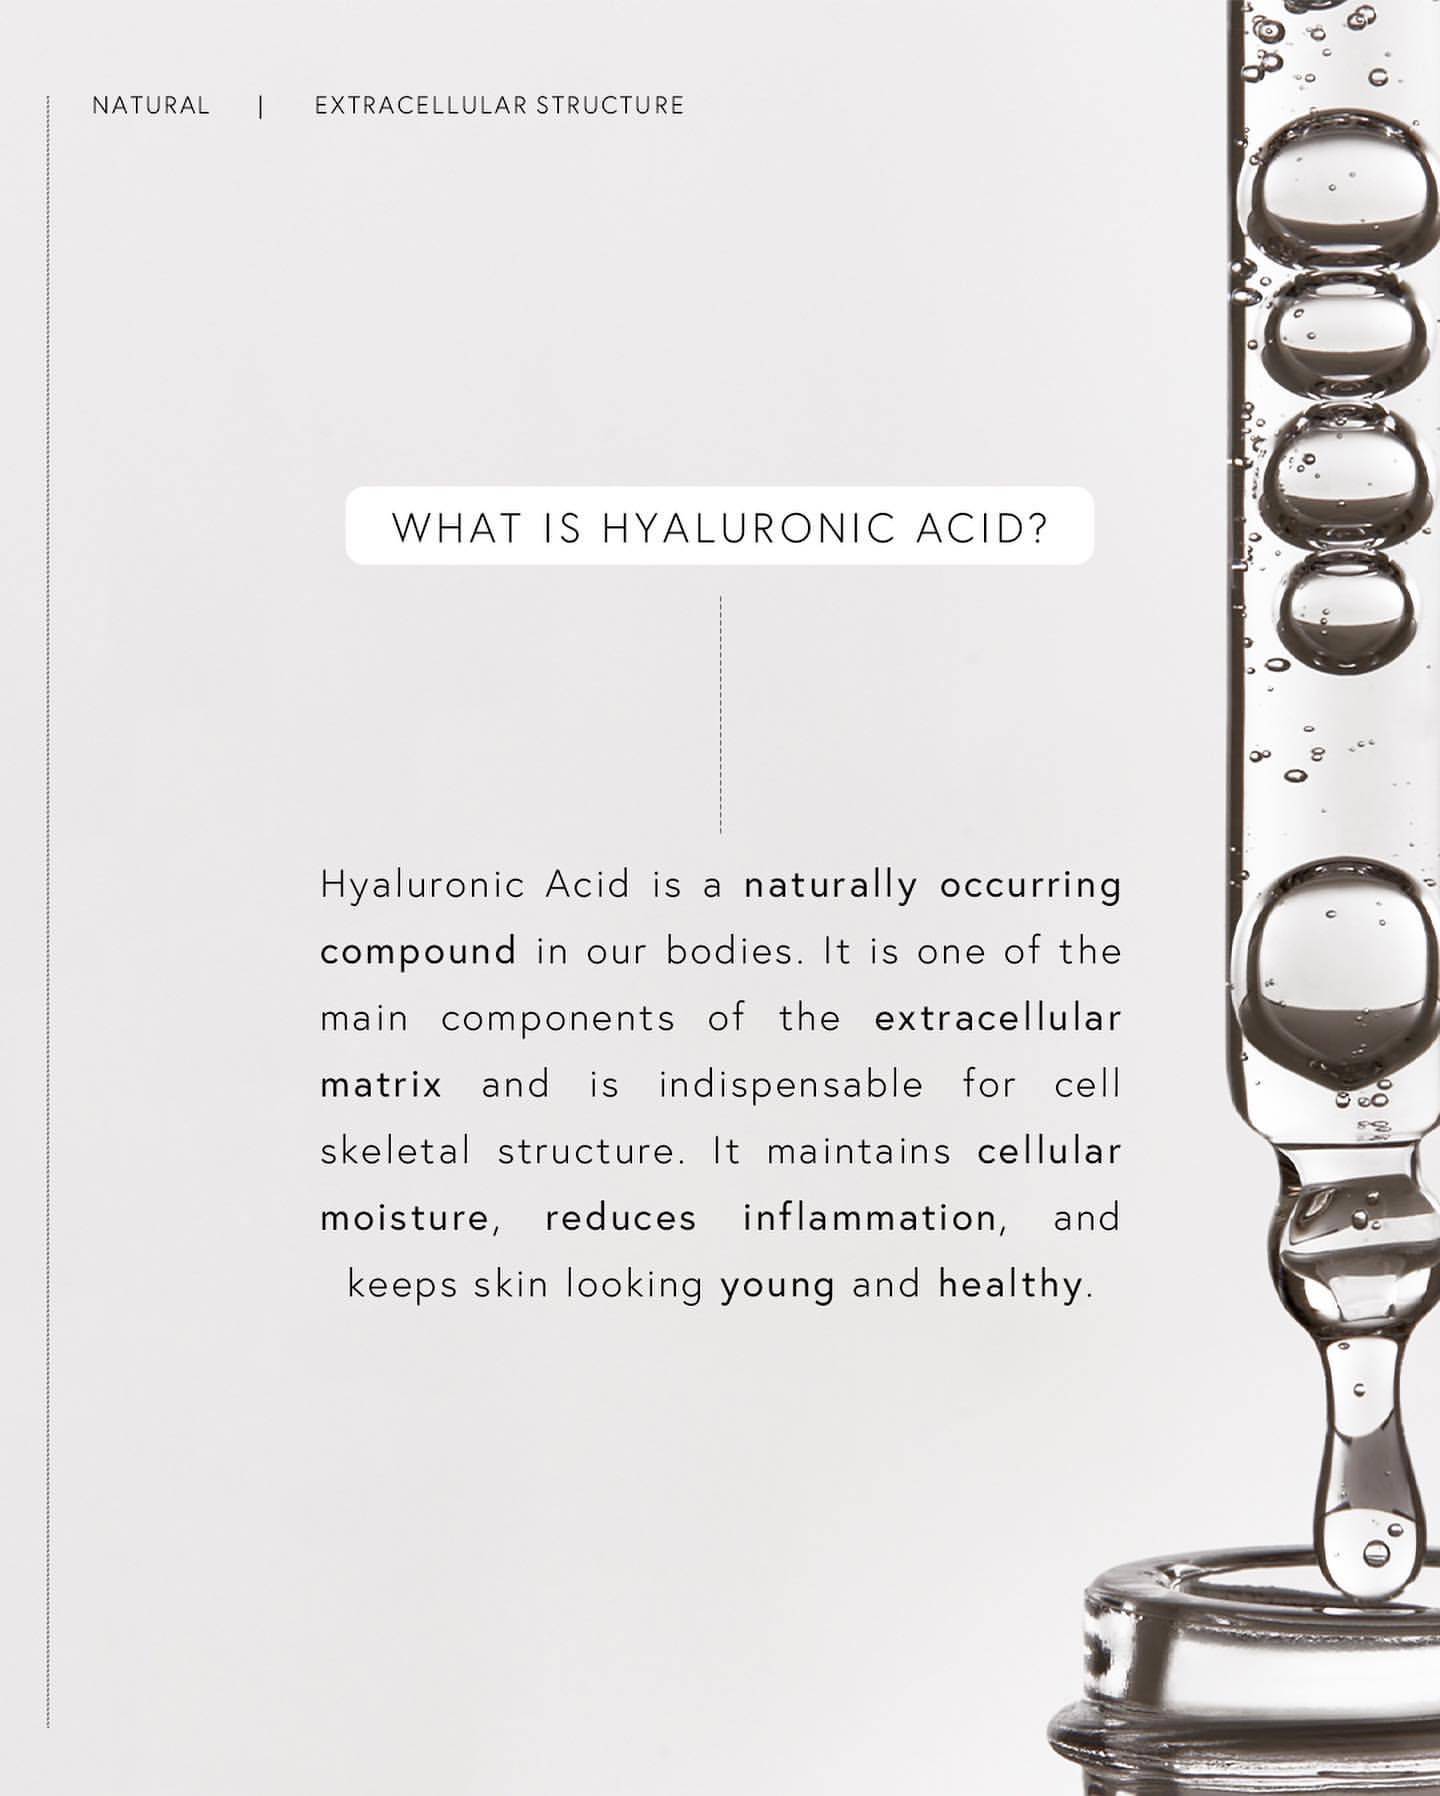 What is Hyaluronic acid